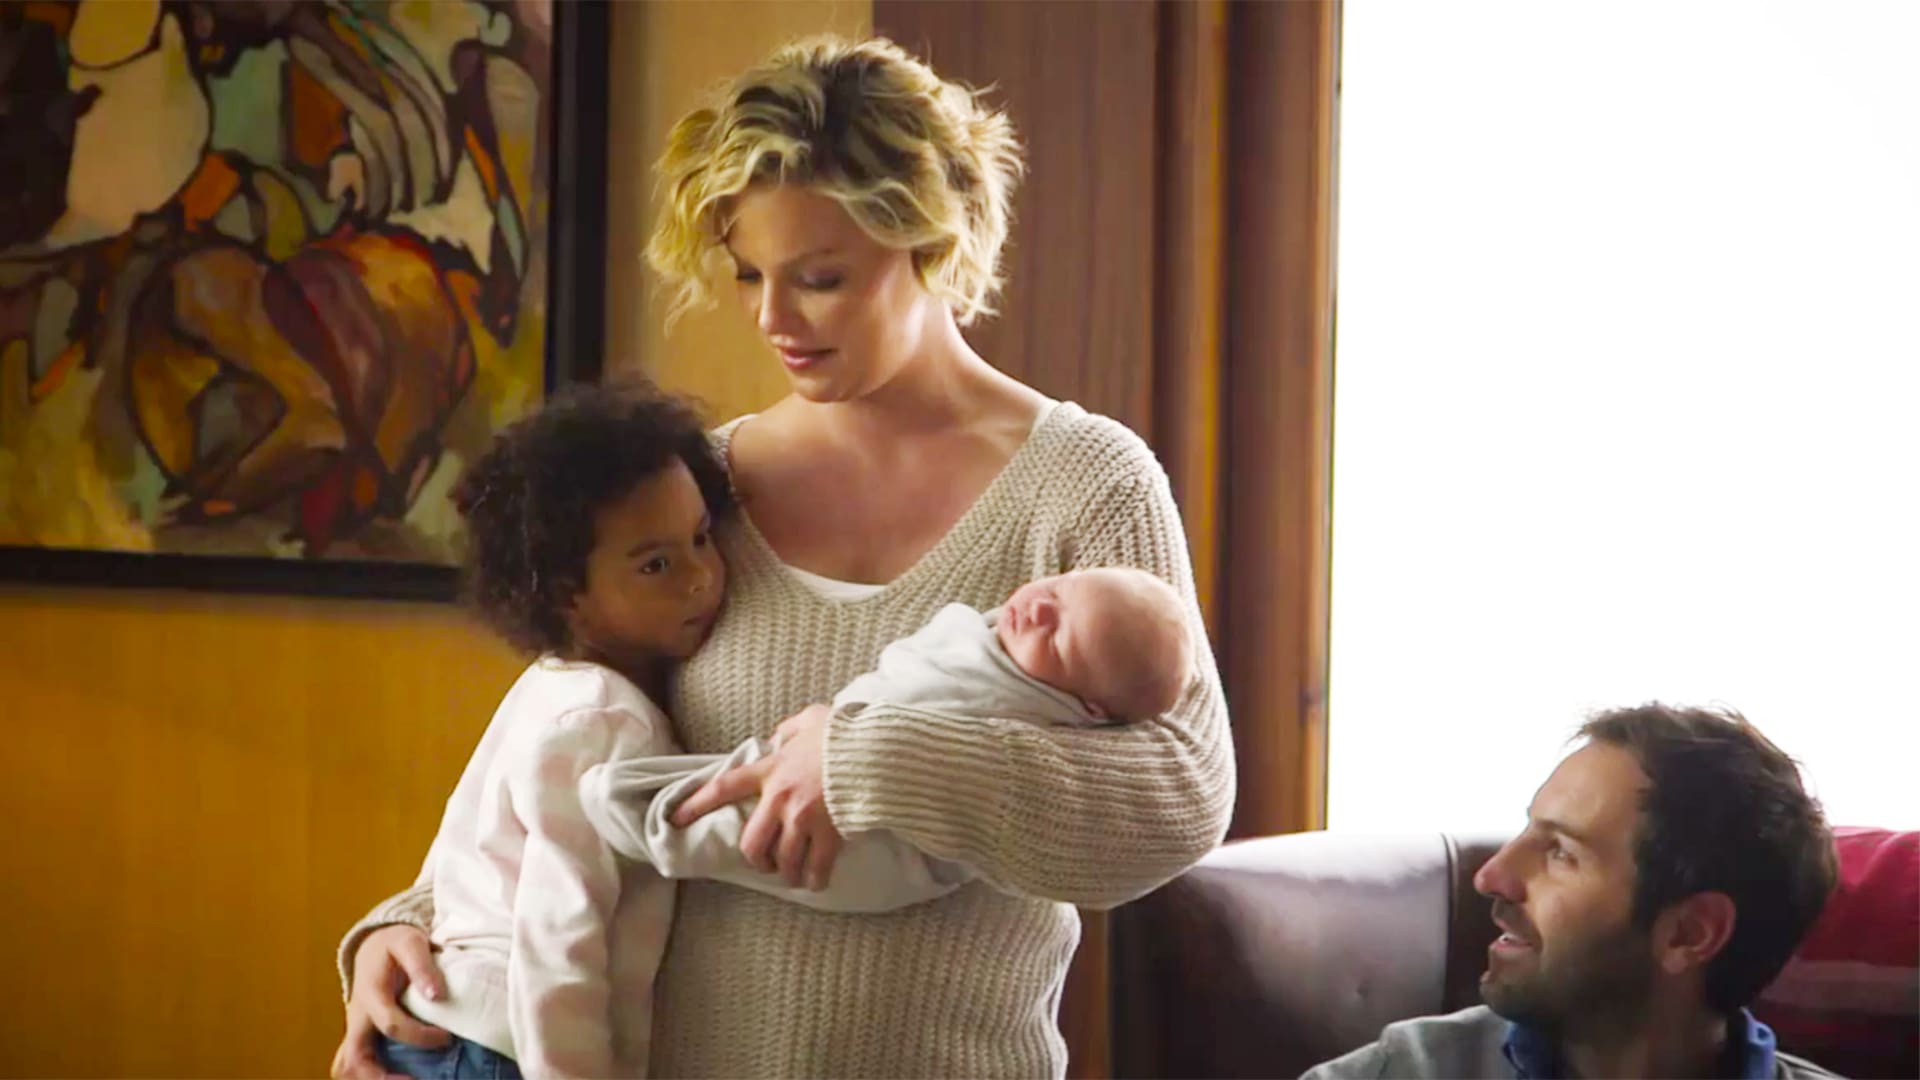 ”katherine-heigl-breaks-her-silence-on-the-black-lives-matter-movement-writes-emotional-letter-about-breaking-her-black-daughters-spirit”